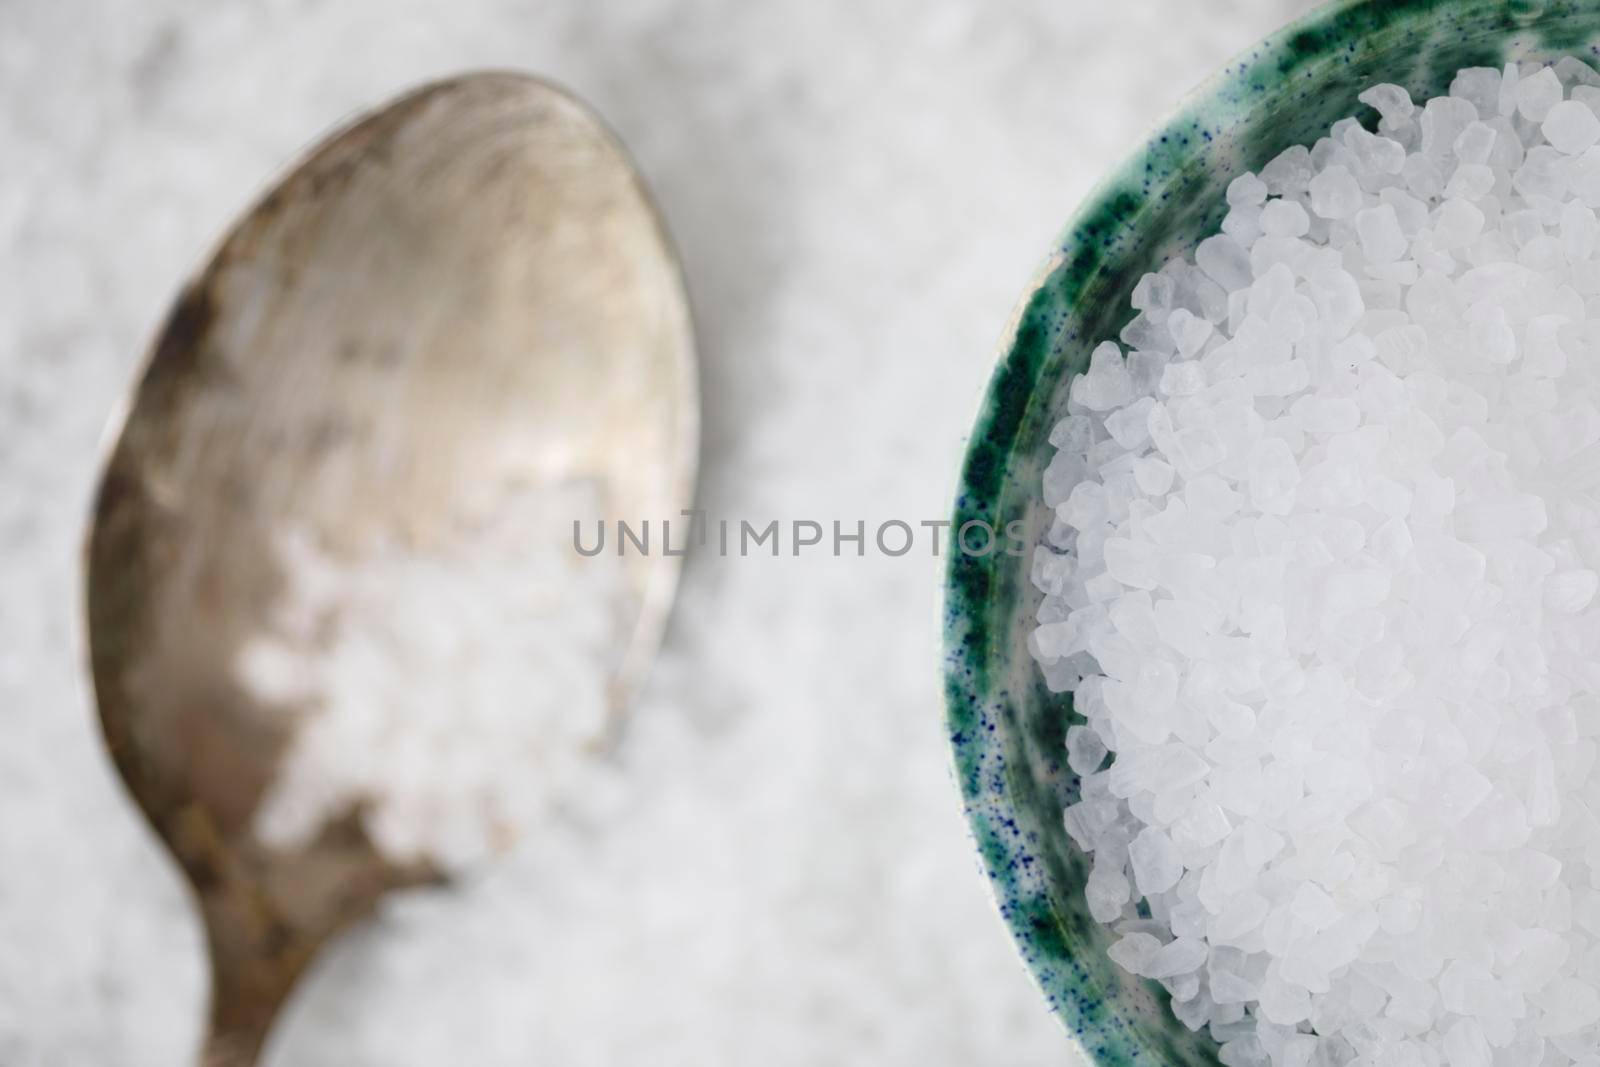 Salt crystals in green bowl with spoon on bed of salt.